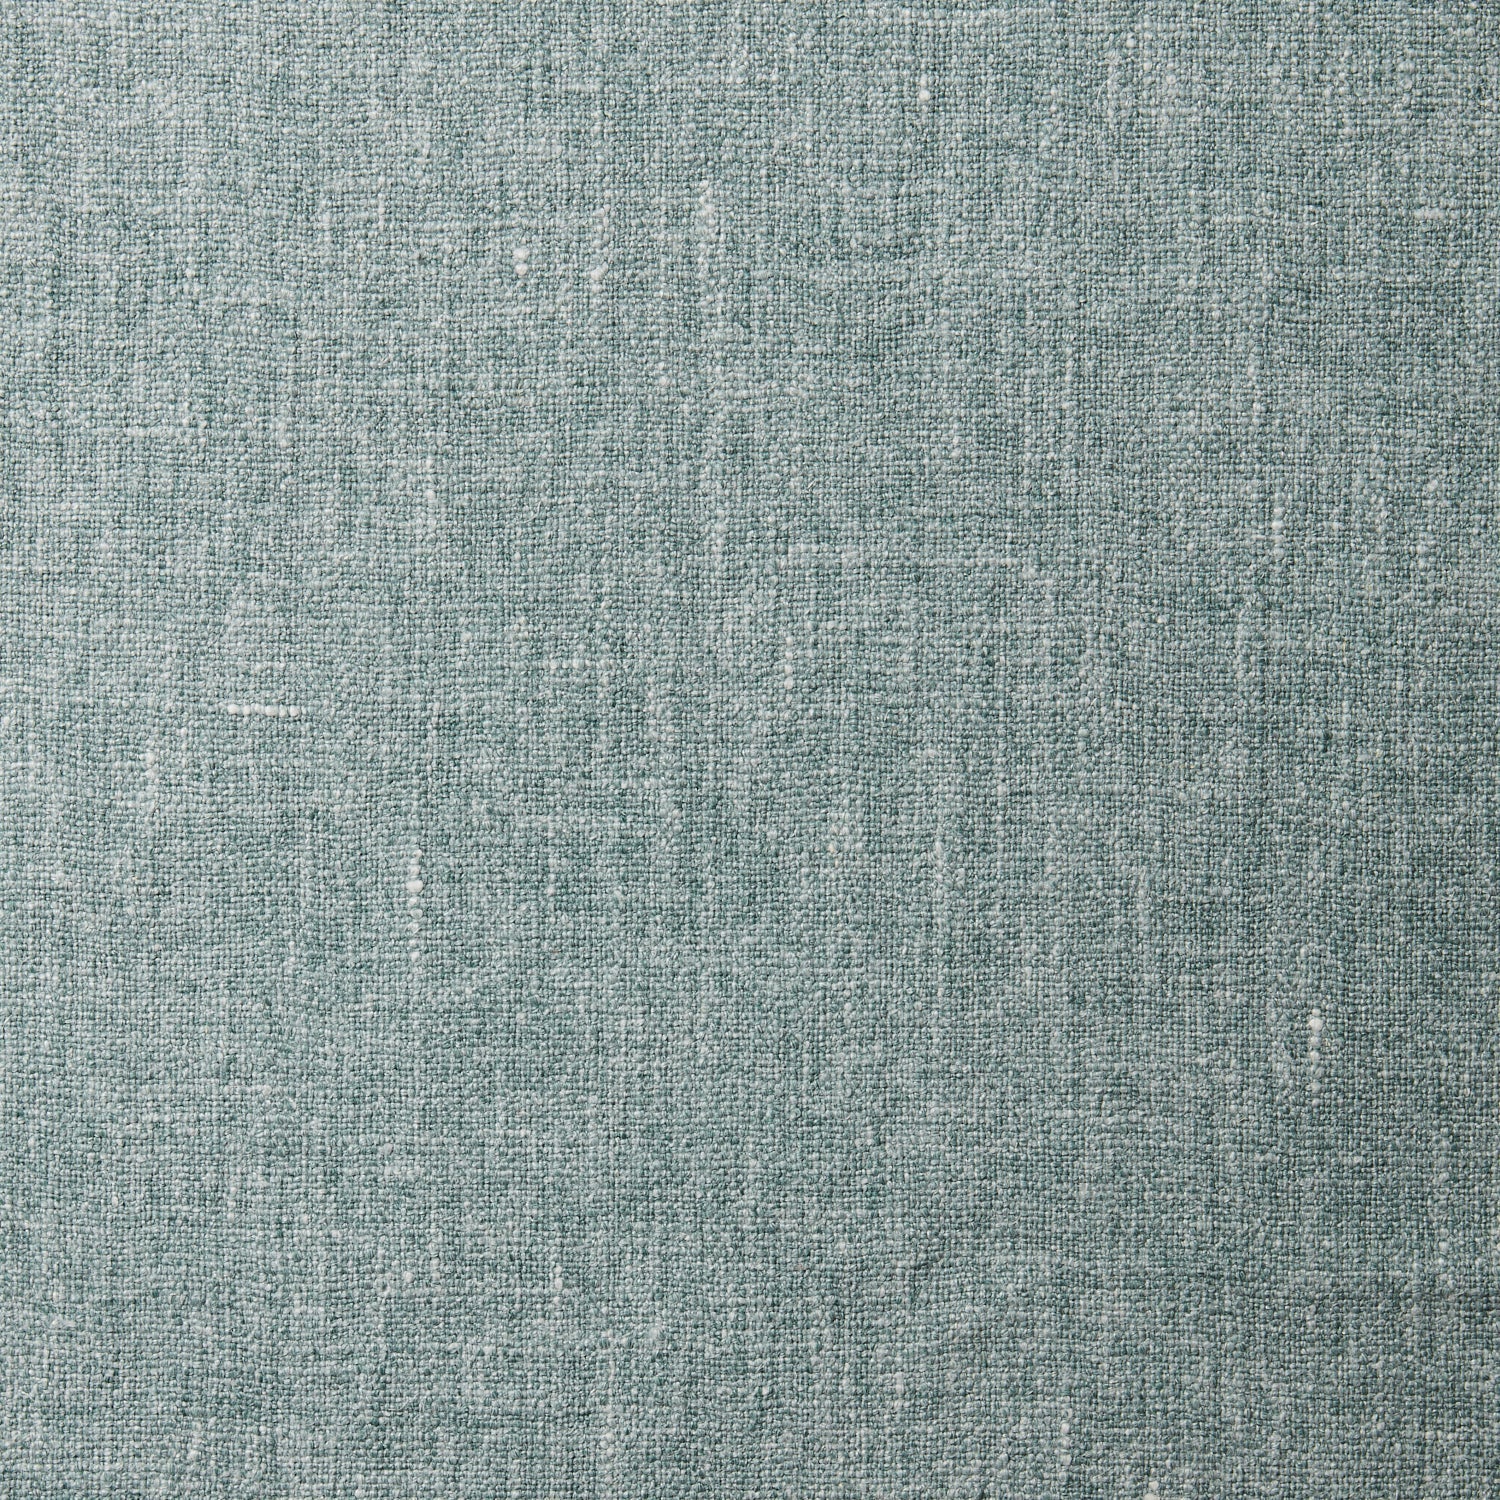 A swatch of blended linen fabric in a mottled light jade color.